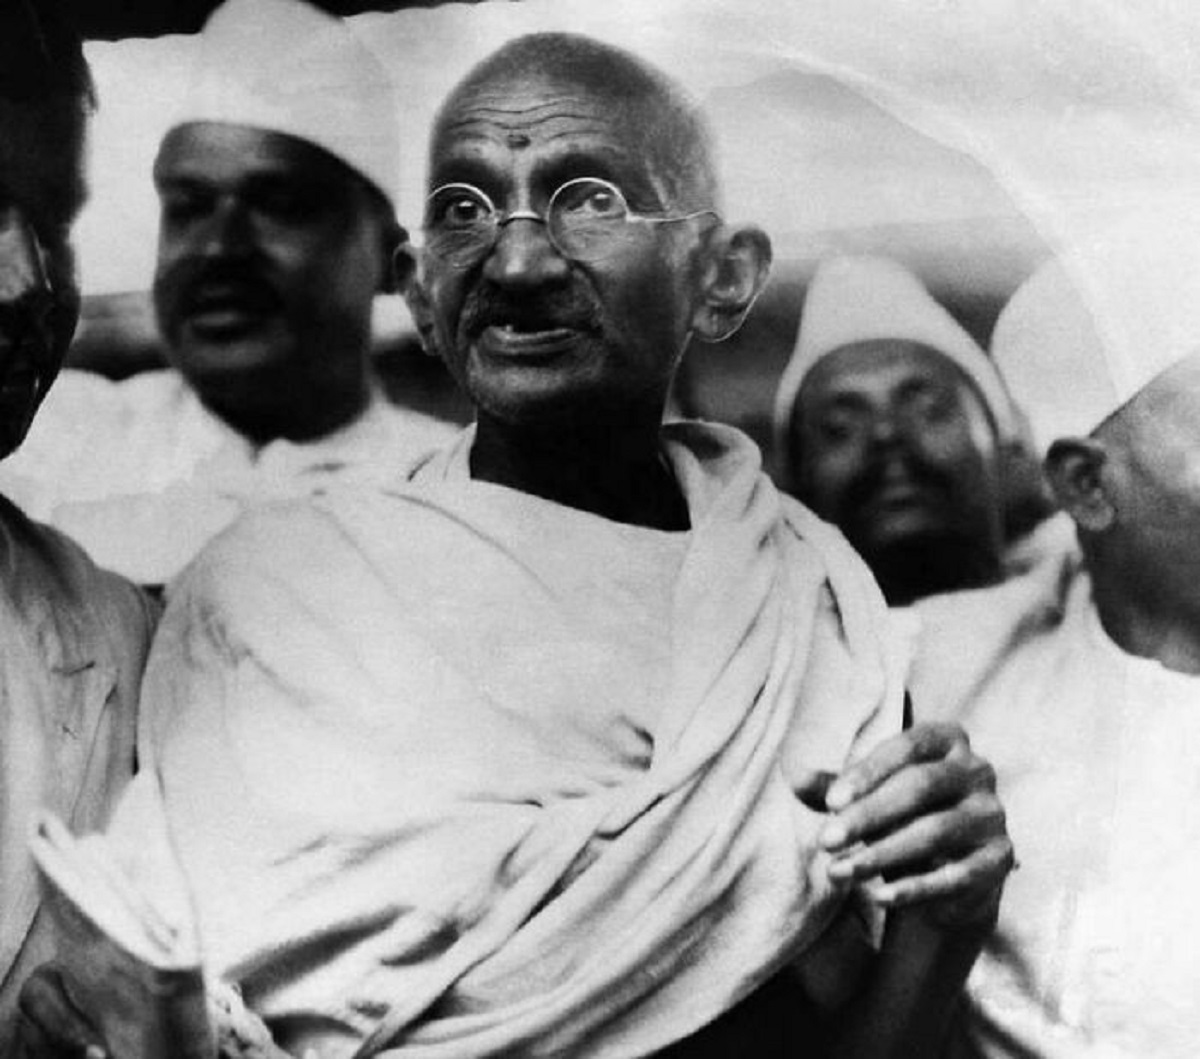 Mufuggin Gandhi.

When Gandhi's wife was stricken with pneumonia, British doctors told her husband that a shot of penicillin would heal her; nevertheless, Gandhi refused to have alien medicine injected into her body, and she died.

Soon after, Gandhi caught malaria and, relenting from the standard he applied to his wife, allowed doctors to save his life with quinine. He also allowed British doctors to perform an appendectomy on him, an alien operation if ever there was one.

Also he served on the British side in South Africa and earned a medal for valor.